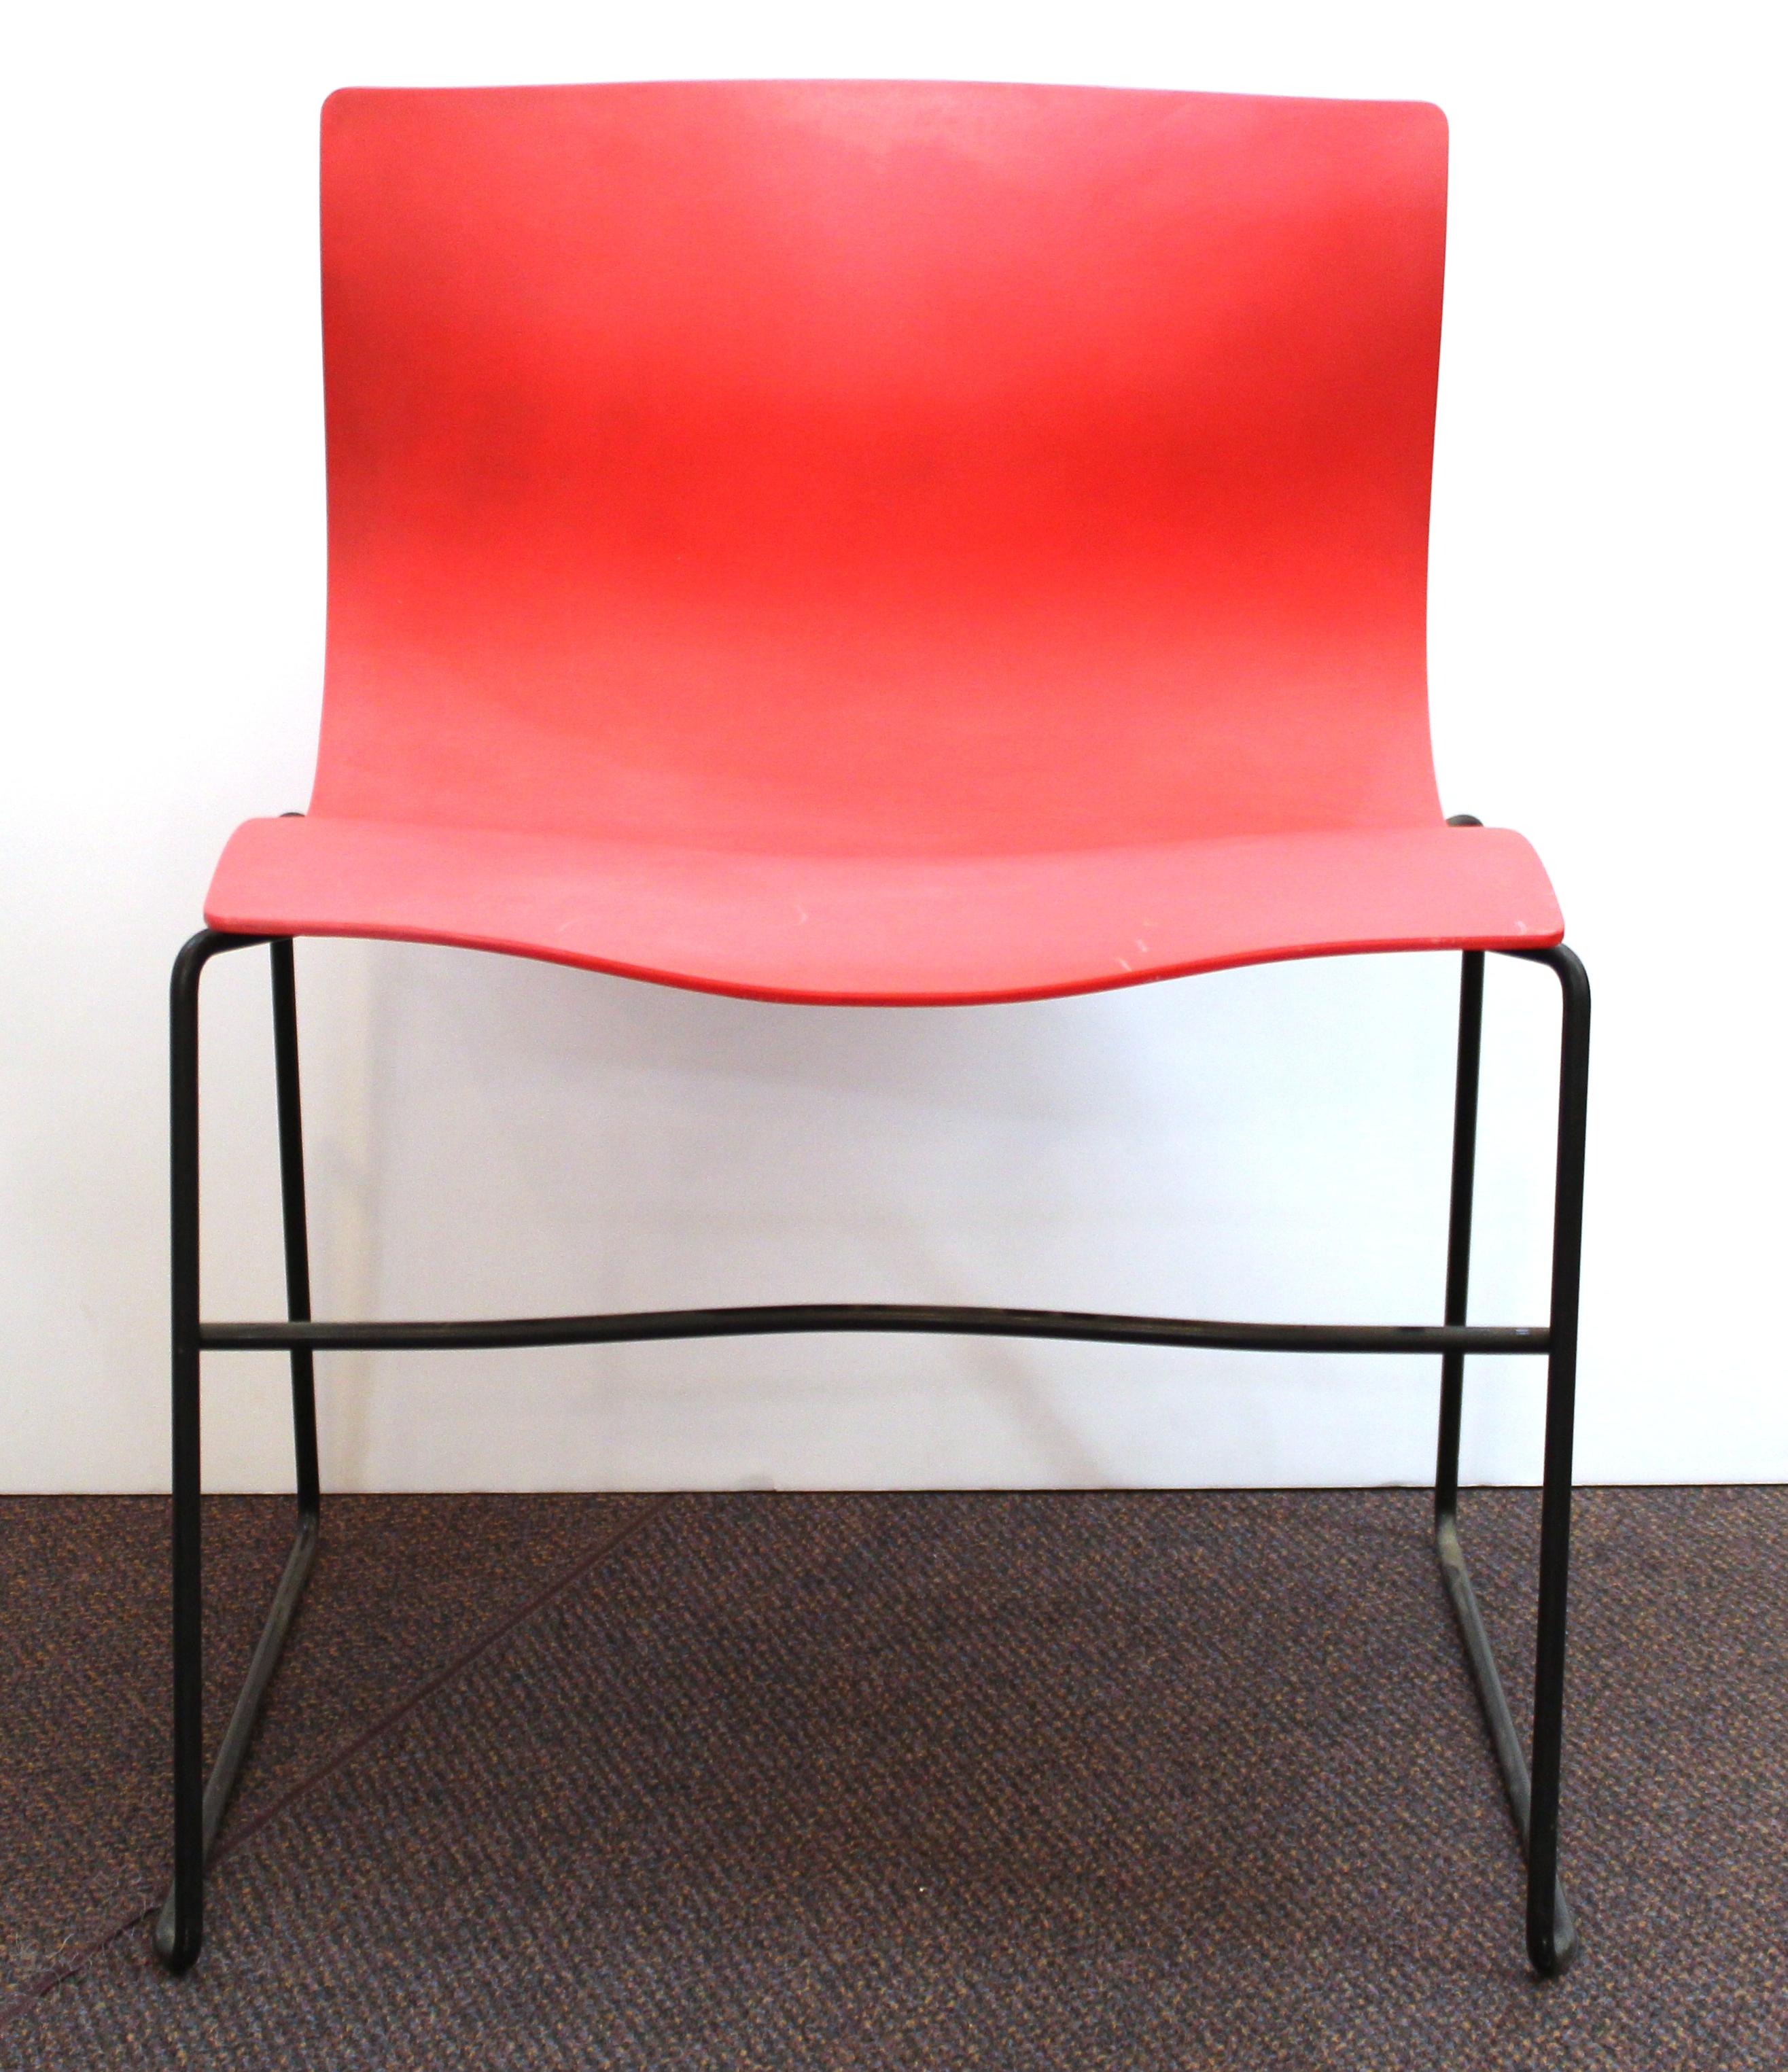 Postmodern handkerchief chair designed by Massimo Vignelli for Knoll International in the 1980s. Label on the bottom. The piece is in great vintage condition with some minor age-appropriate wear to the seating surface and metal. This chair is from